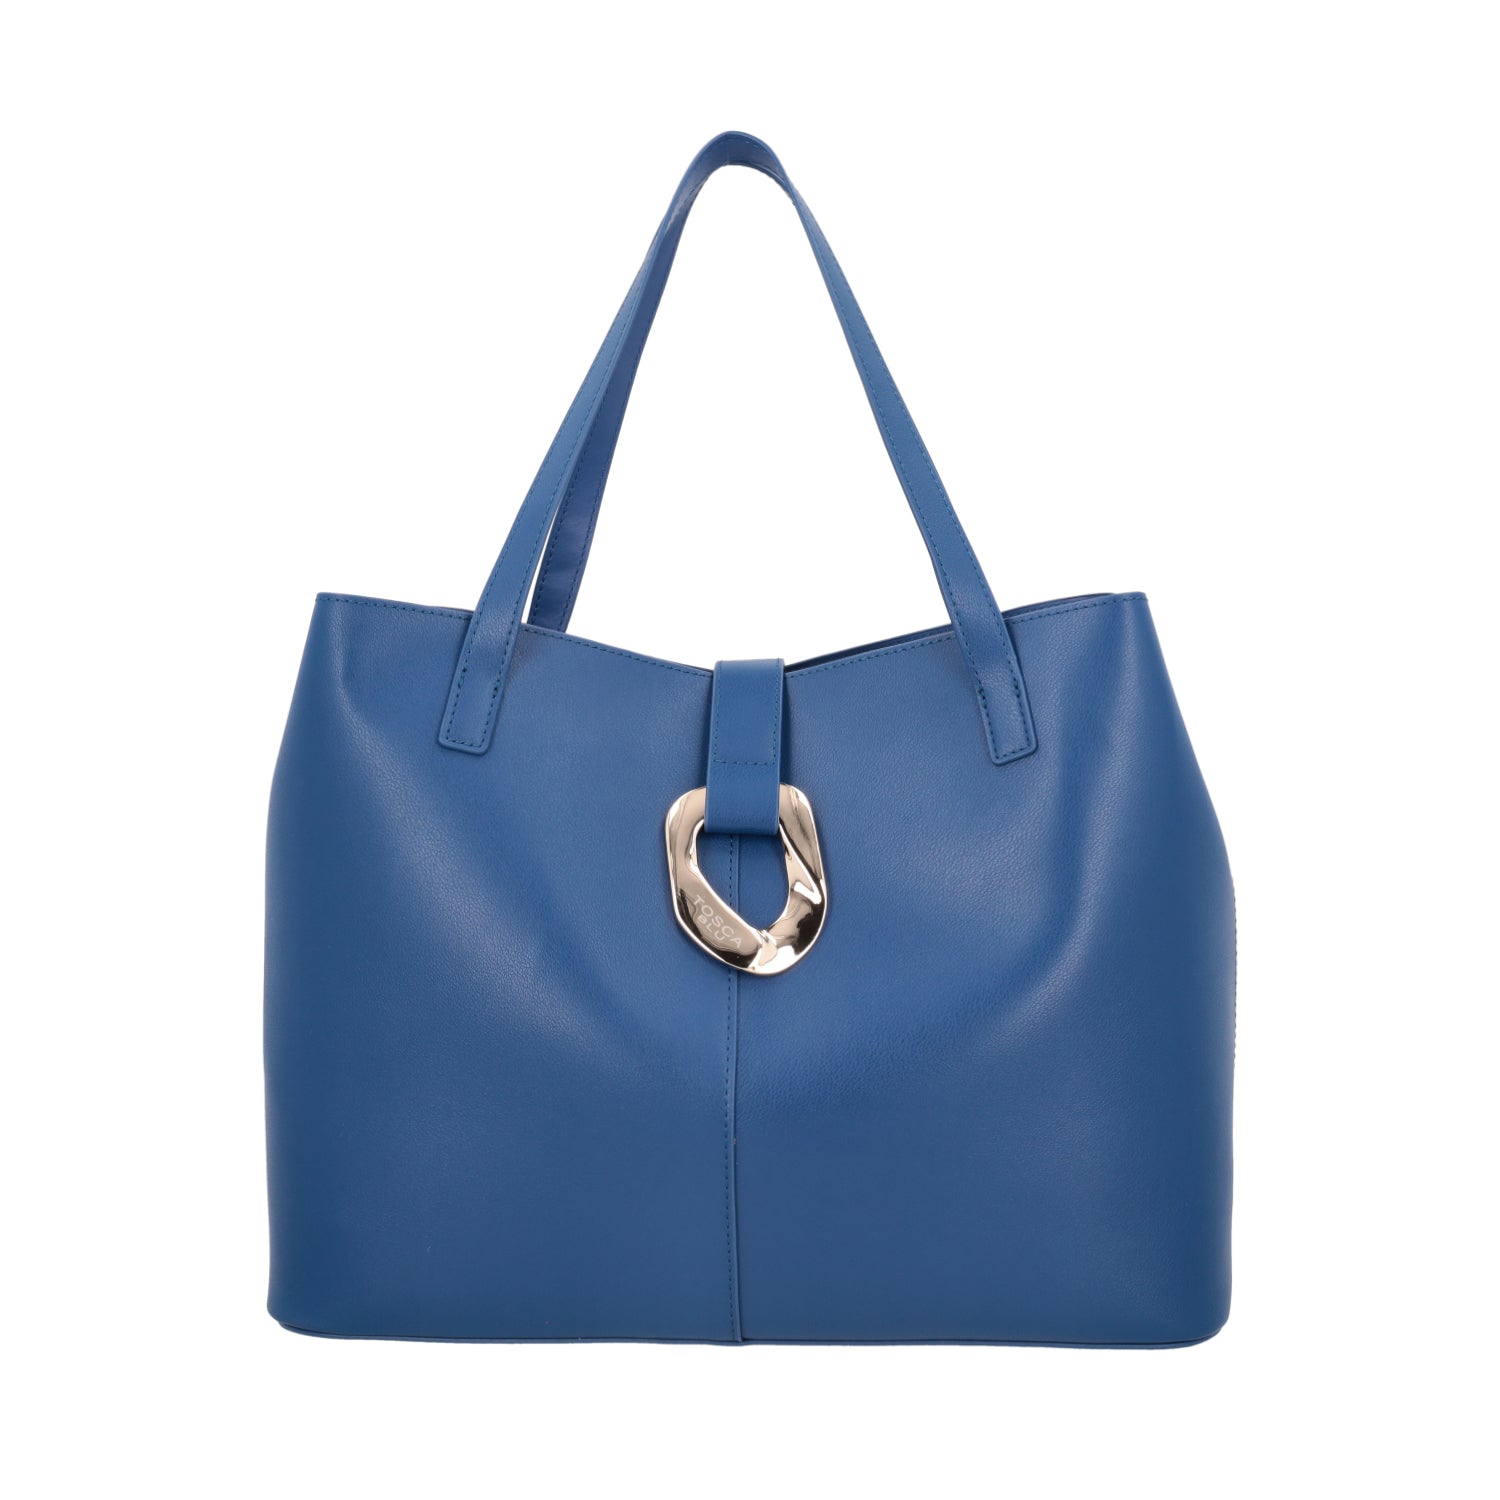 BLUE PRIMULA SHOPPING BAG WITH GOLDEN ACCESSORY